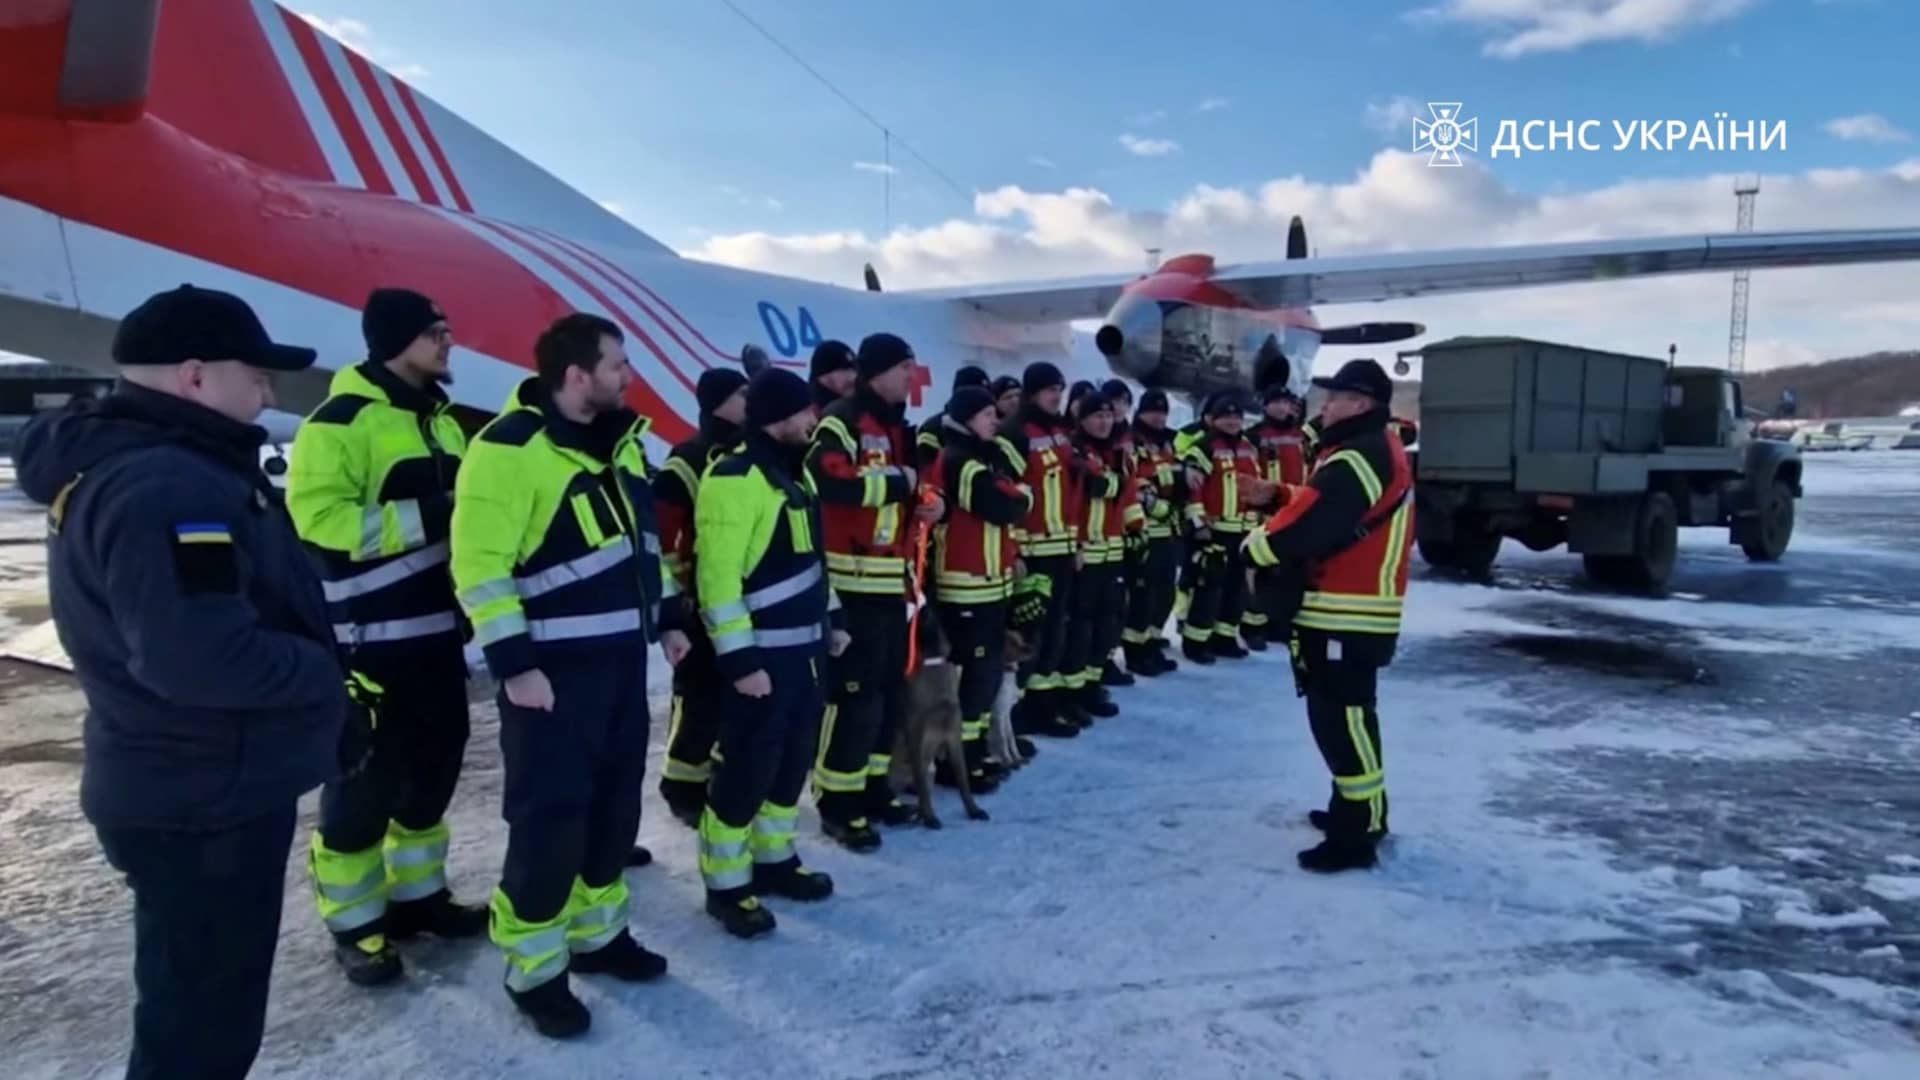 Rescuers of the State Emergency of Ukraine board a plane, on their way to help find survivors of the deadly earthquake in Turkey, at an unknown location in Ukraine February 7, 2023. 